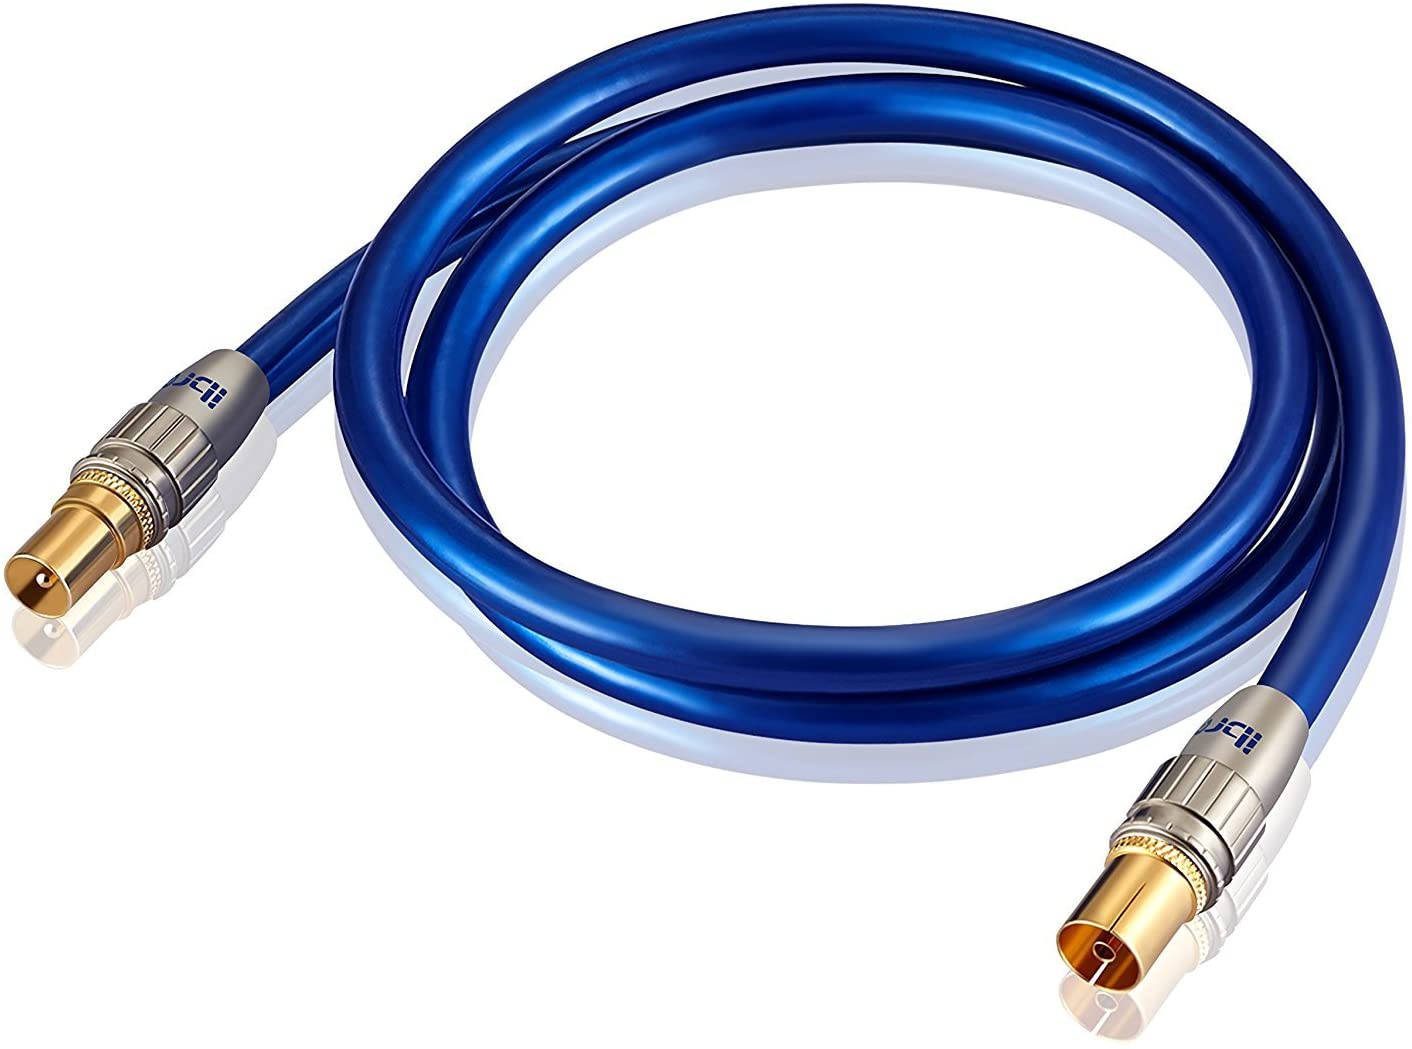 3m HDTV Antenna Cable|TV Aerial Cable|Premium Coaxial Cable|Connectors: Coax Male to Coax Female|For UHF/RF/DVB-T/DVB-T2 TVs, VCRs, DVD players, DVRs, cable boxes and satellite| IBRA Blue Gold